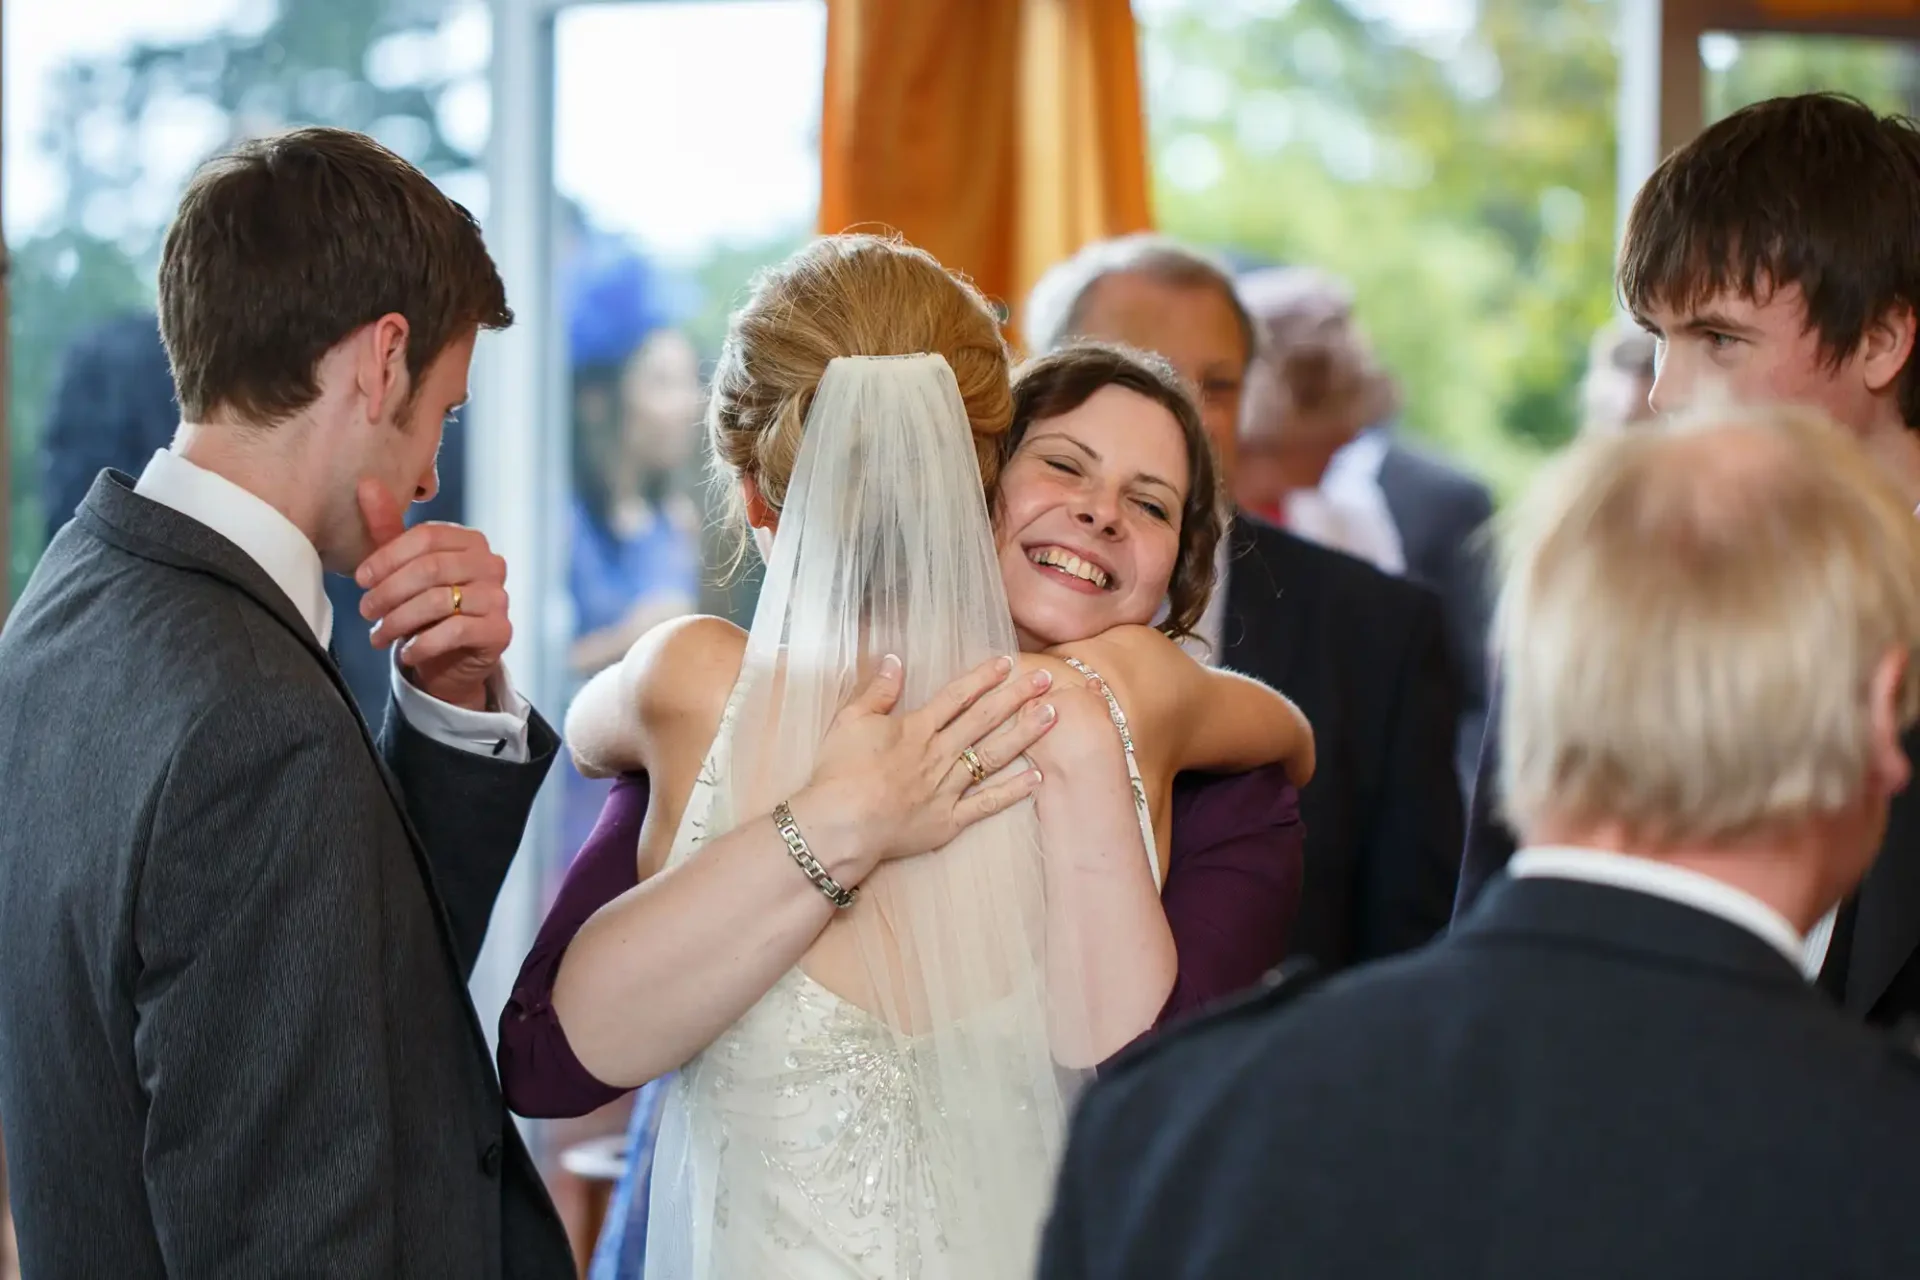 Bride embracing a woman in a blue dress at a wedding, surrounded by guests in a joyous atmosphere.